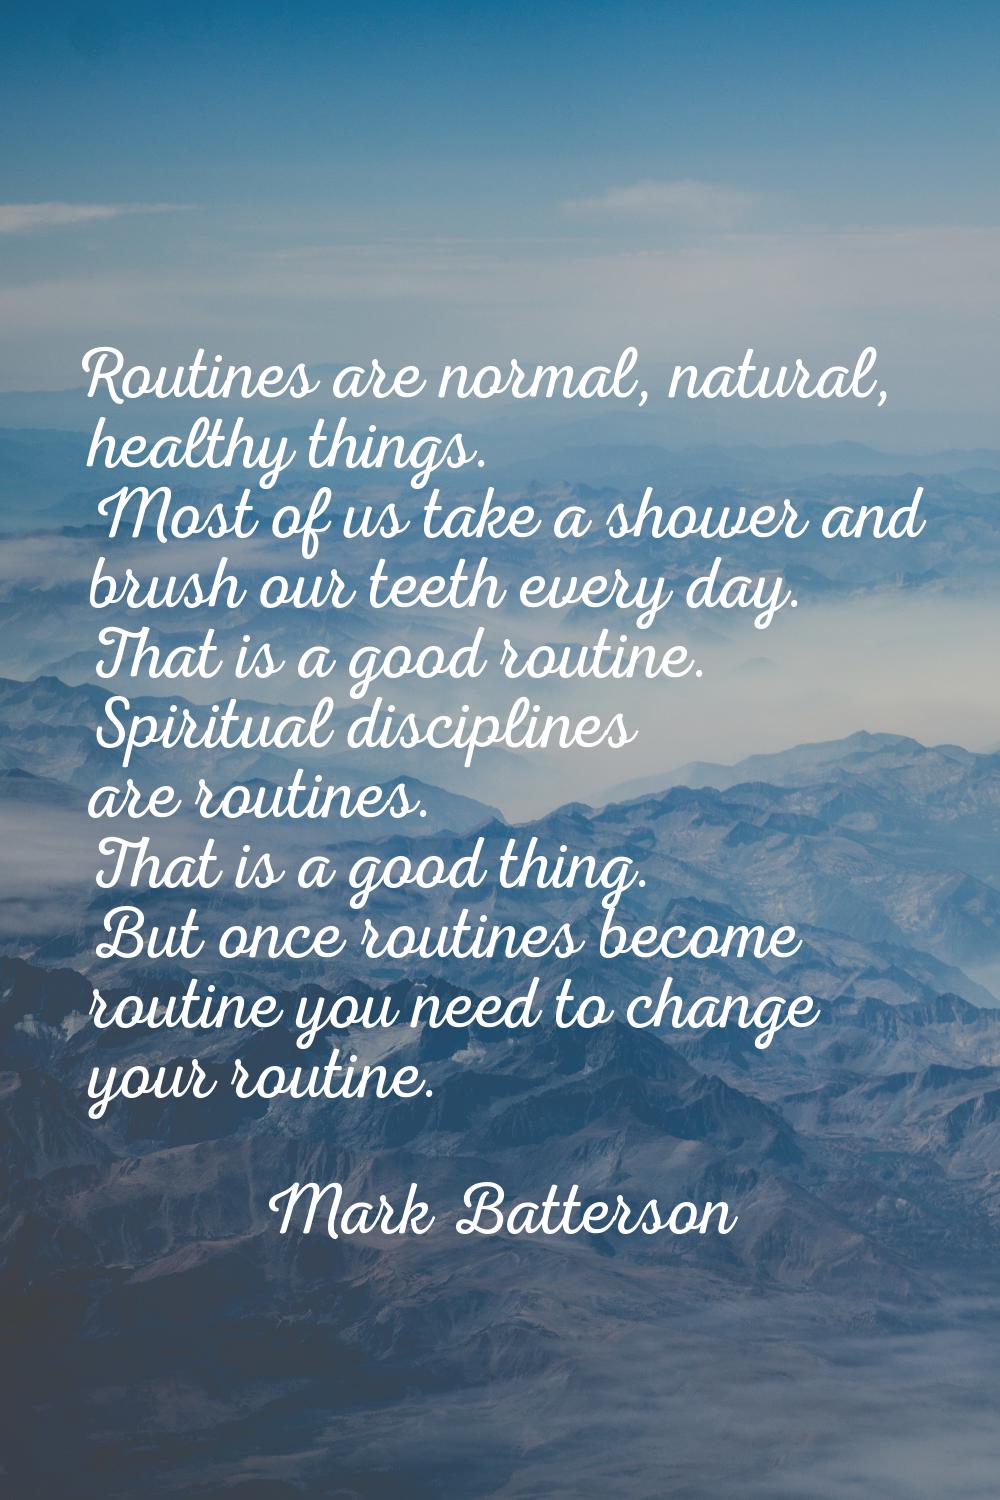 Routines are normal, natural, healthy things. Most of us take a shower and brush our teeth every da